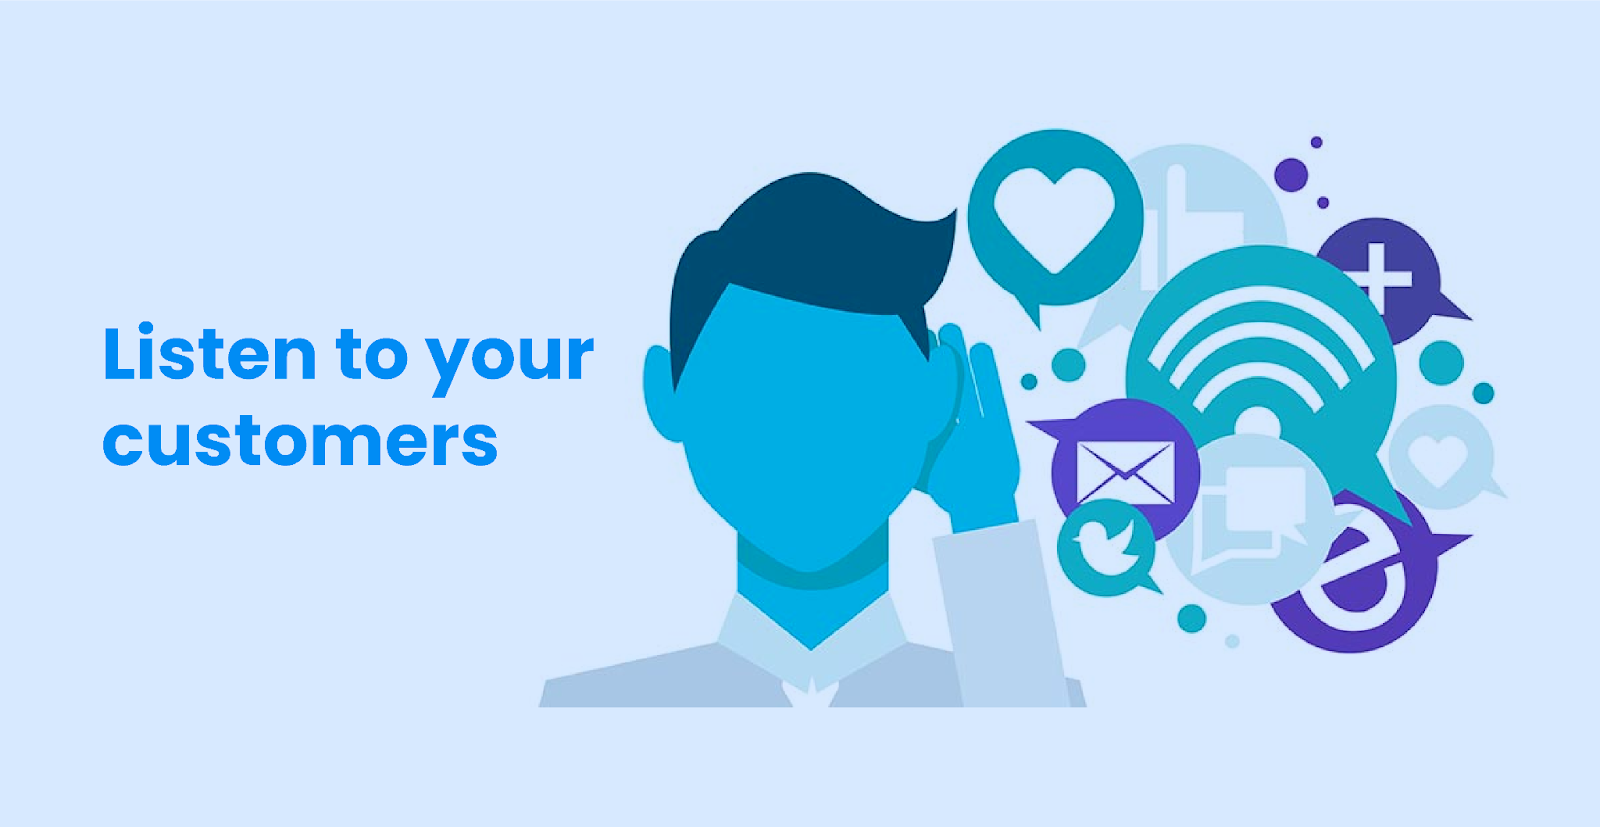 Listen to your customers | A text image of: "Listen to your customers" with an animated man placing one hand on his ear, listening to his customer's concerns online